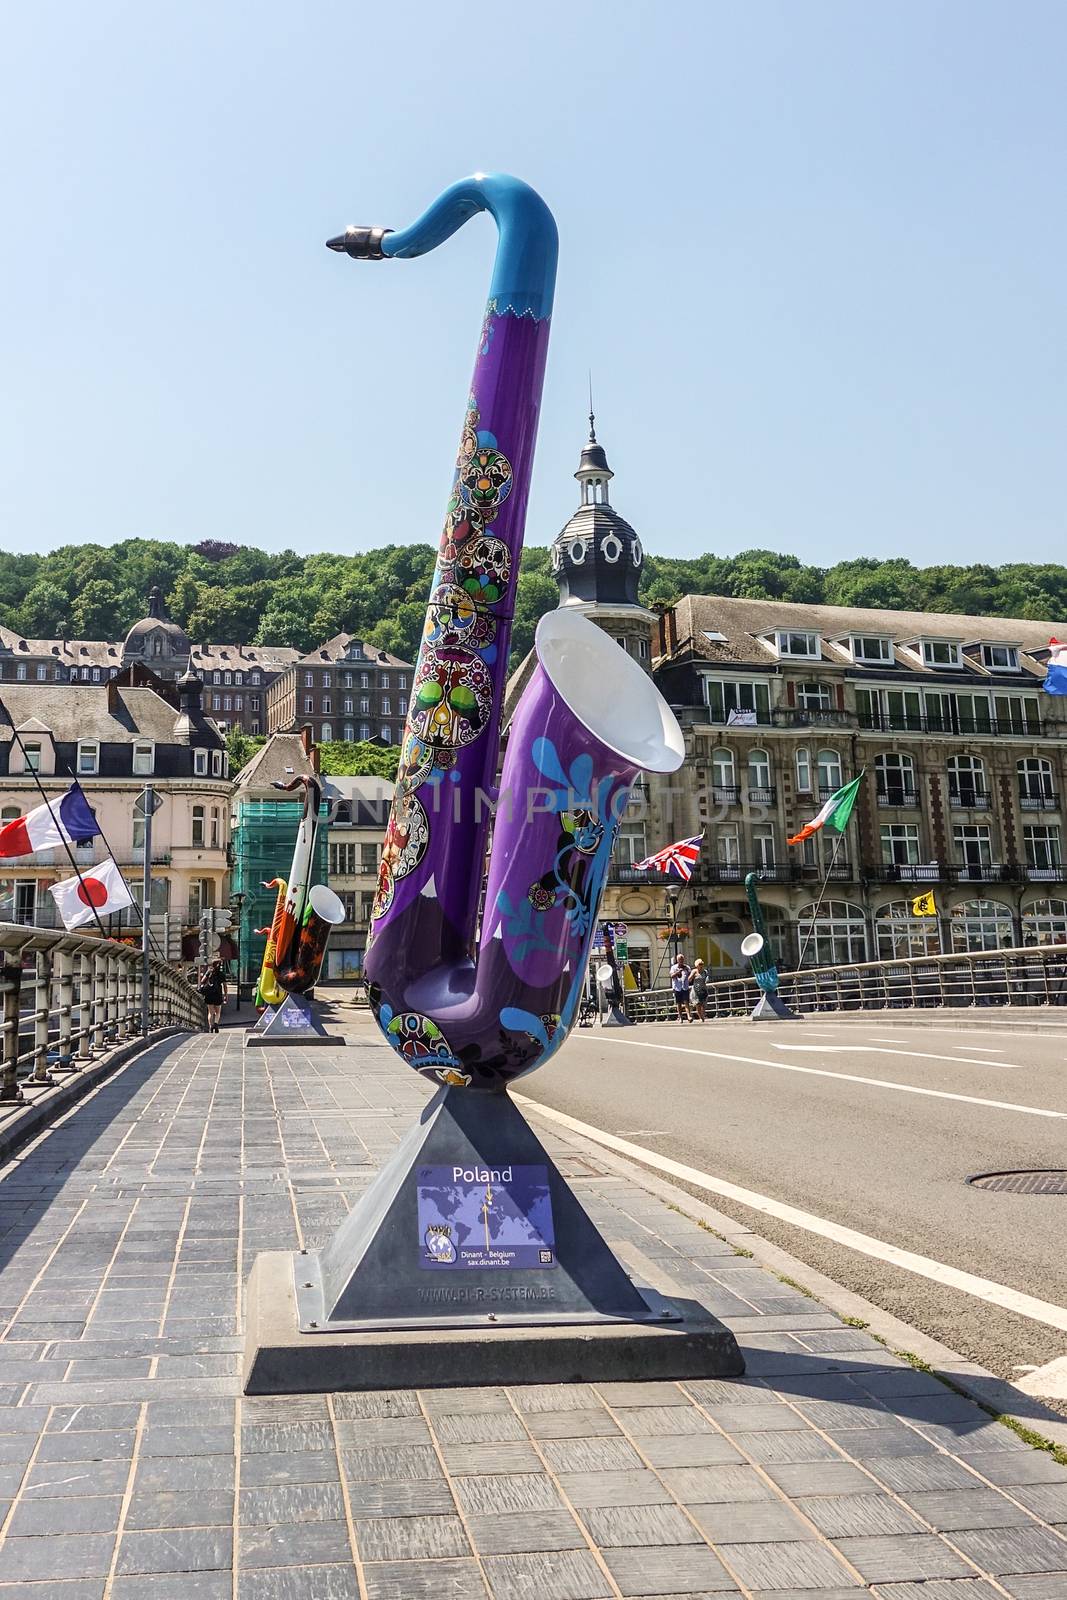 Dinant, Belgium - June 26, 2019: Purple and blue saxophone statue to honor Poland on Charles de Gaulle bridge. Business and houses in back.